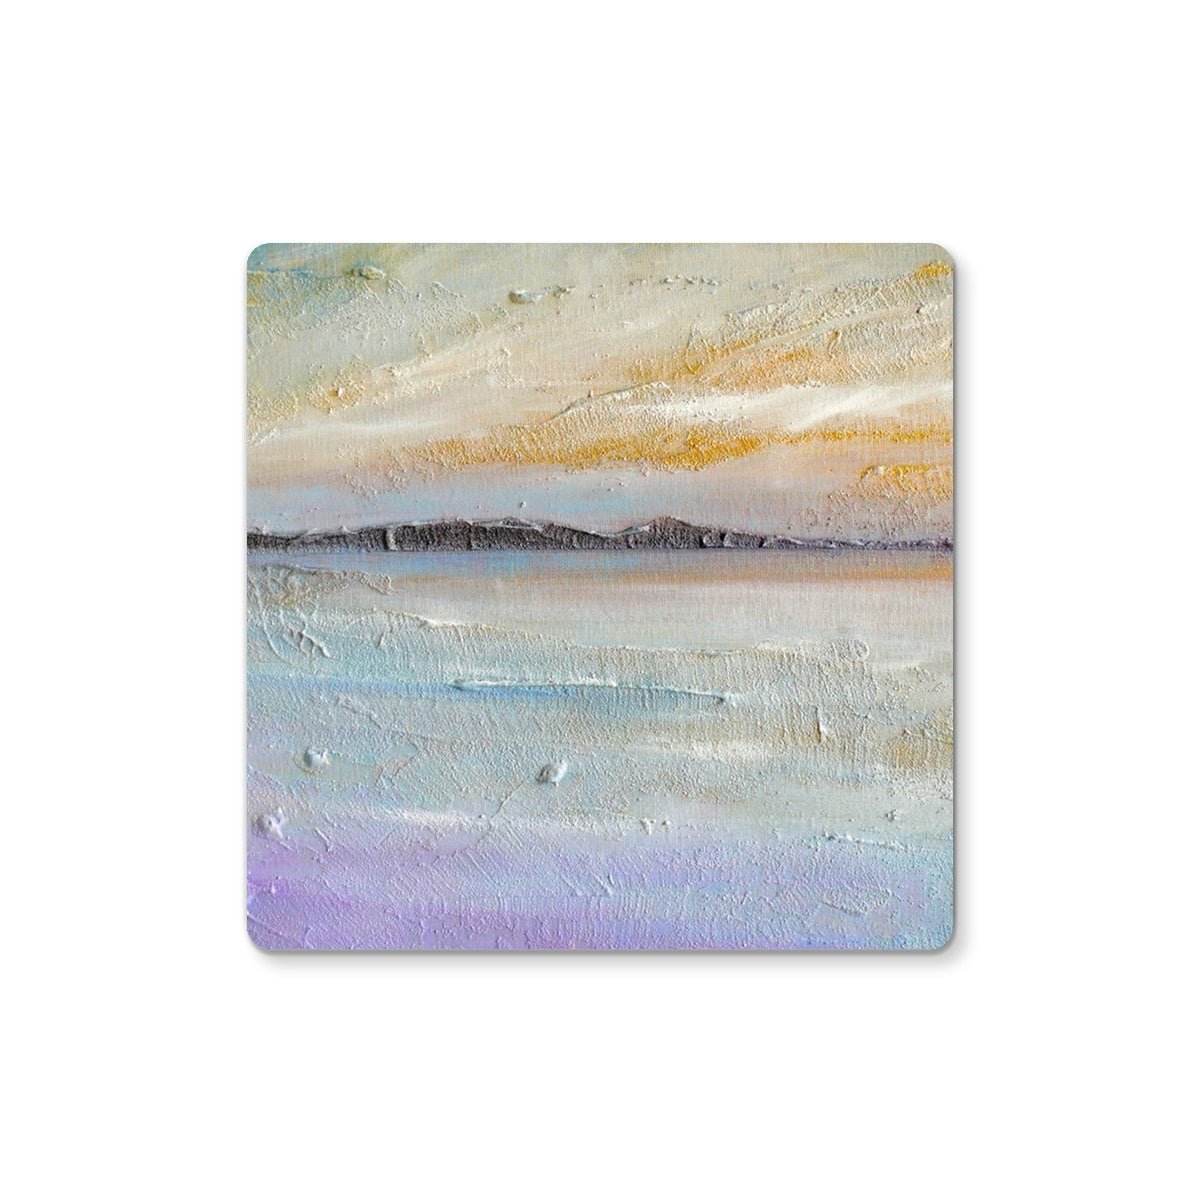 Sollas Beach South Uist Art Gifts Coaster-Coasters-Hebridean Islands Art Gallery-Single Coaster-Paintings, Prints, Homeware, Art Gifts From Scotland By Scottish Artist Kevin Hunter